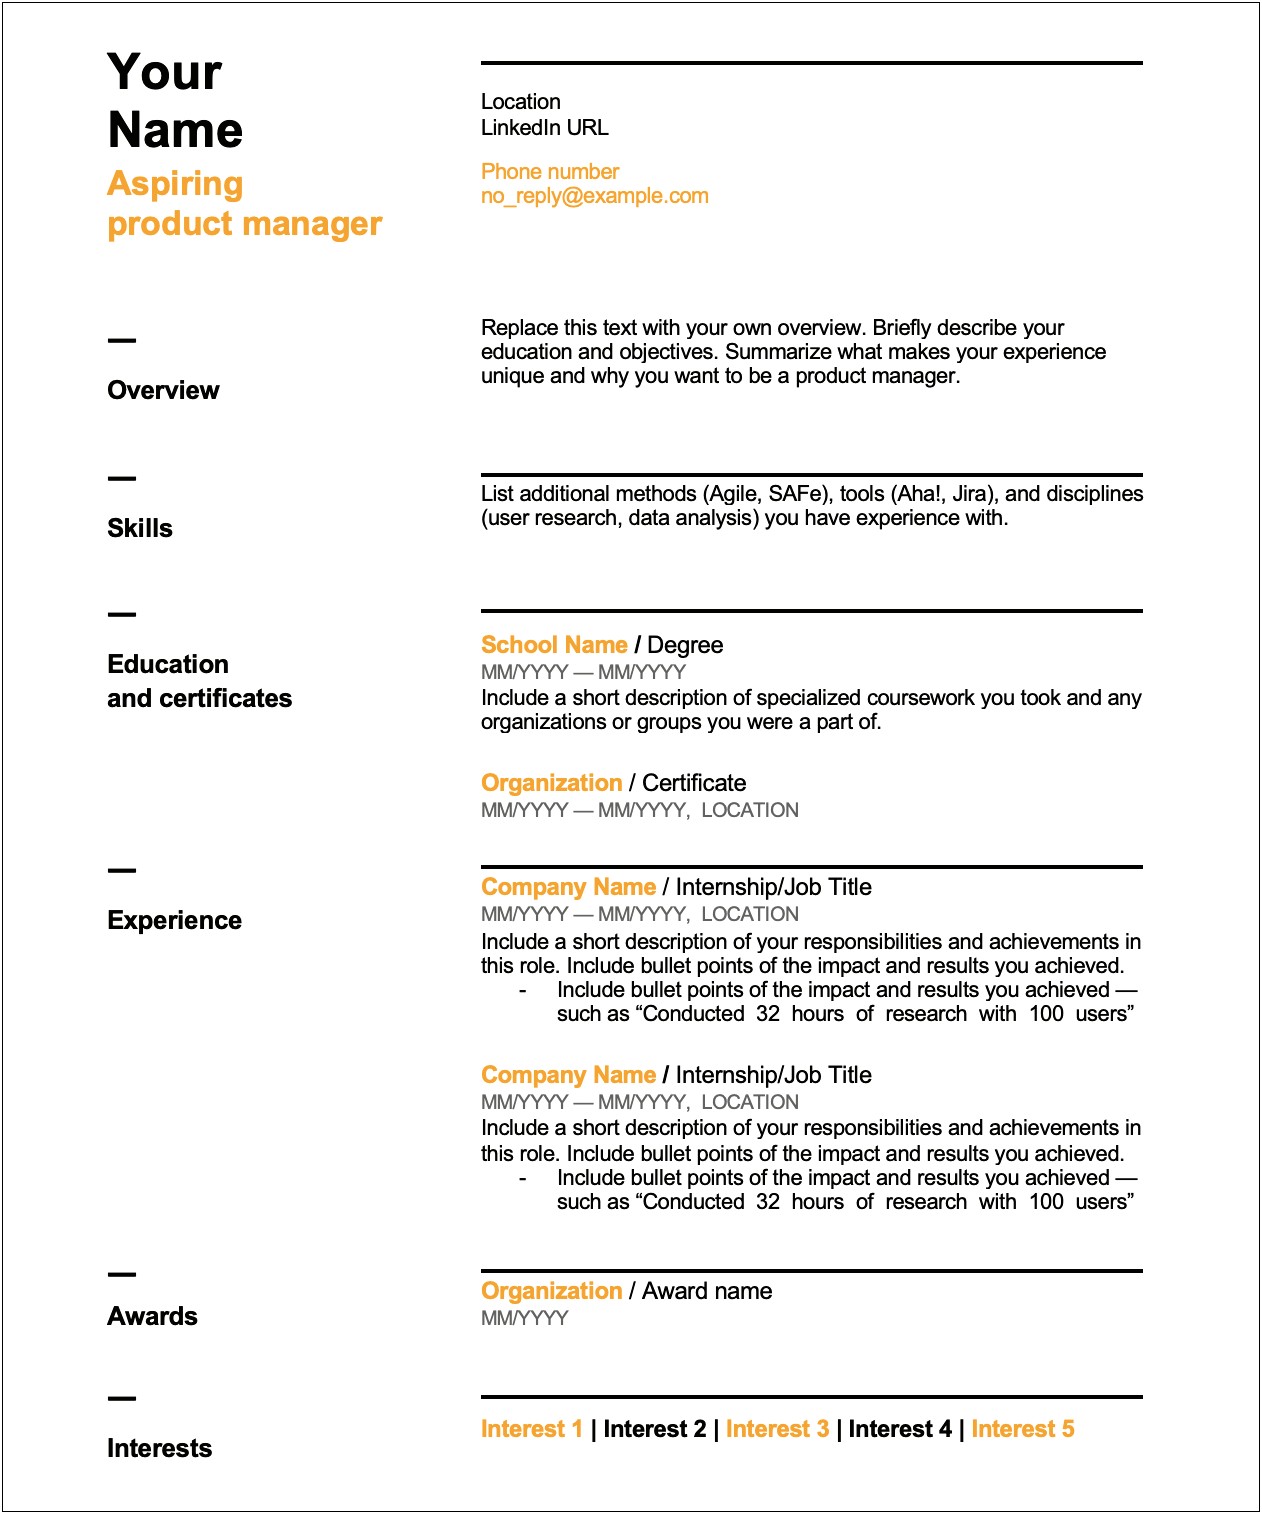 Resume Of Vp Of Product Manager